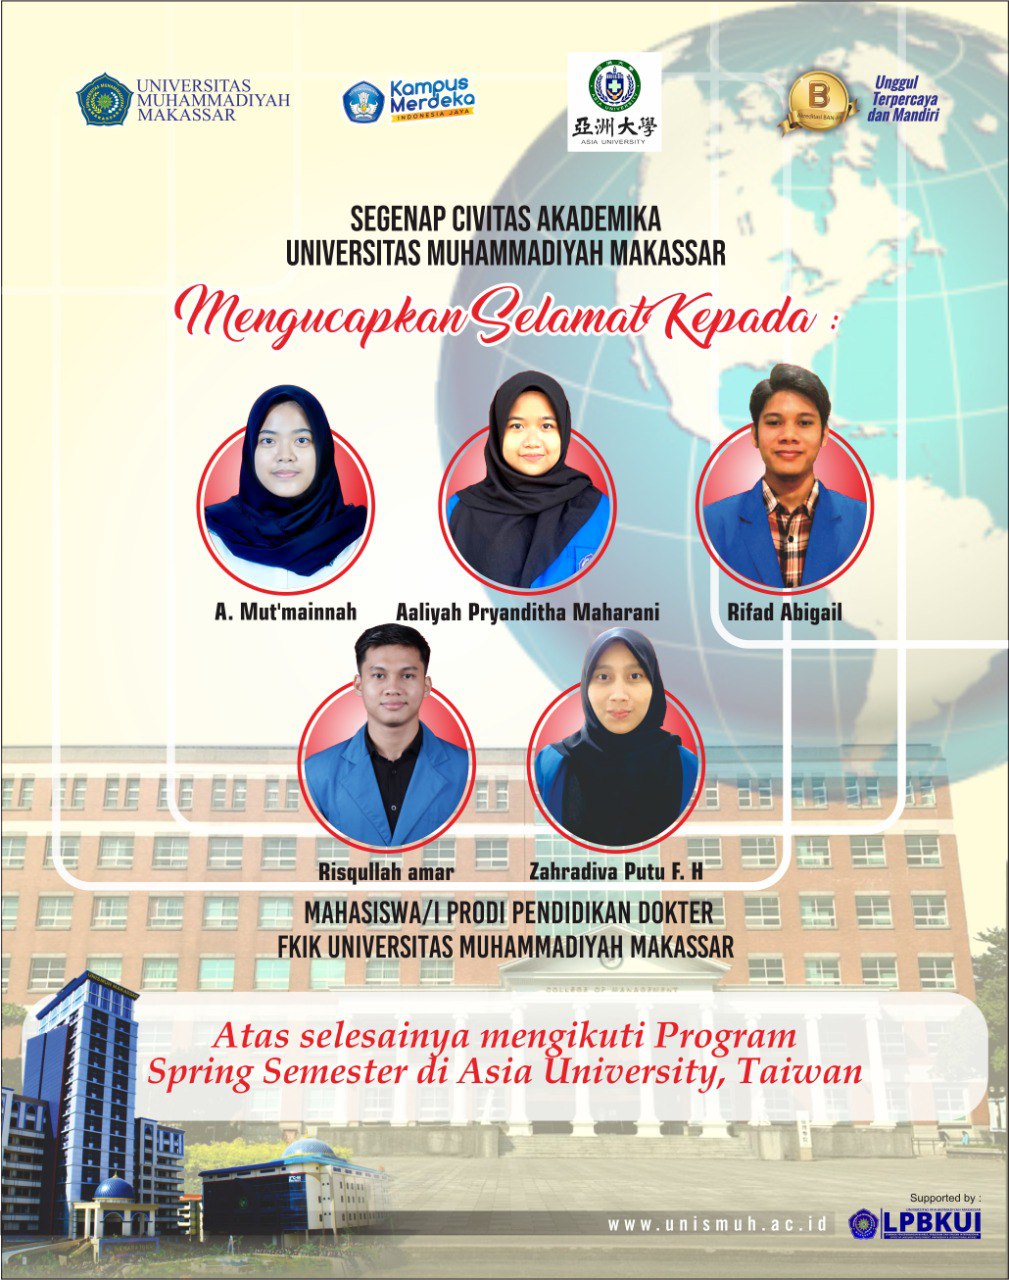 Five Unismuh Makassar Medical Students Complete One Semester at Asia University Taiwan